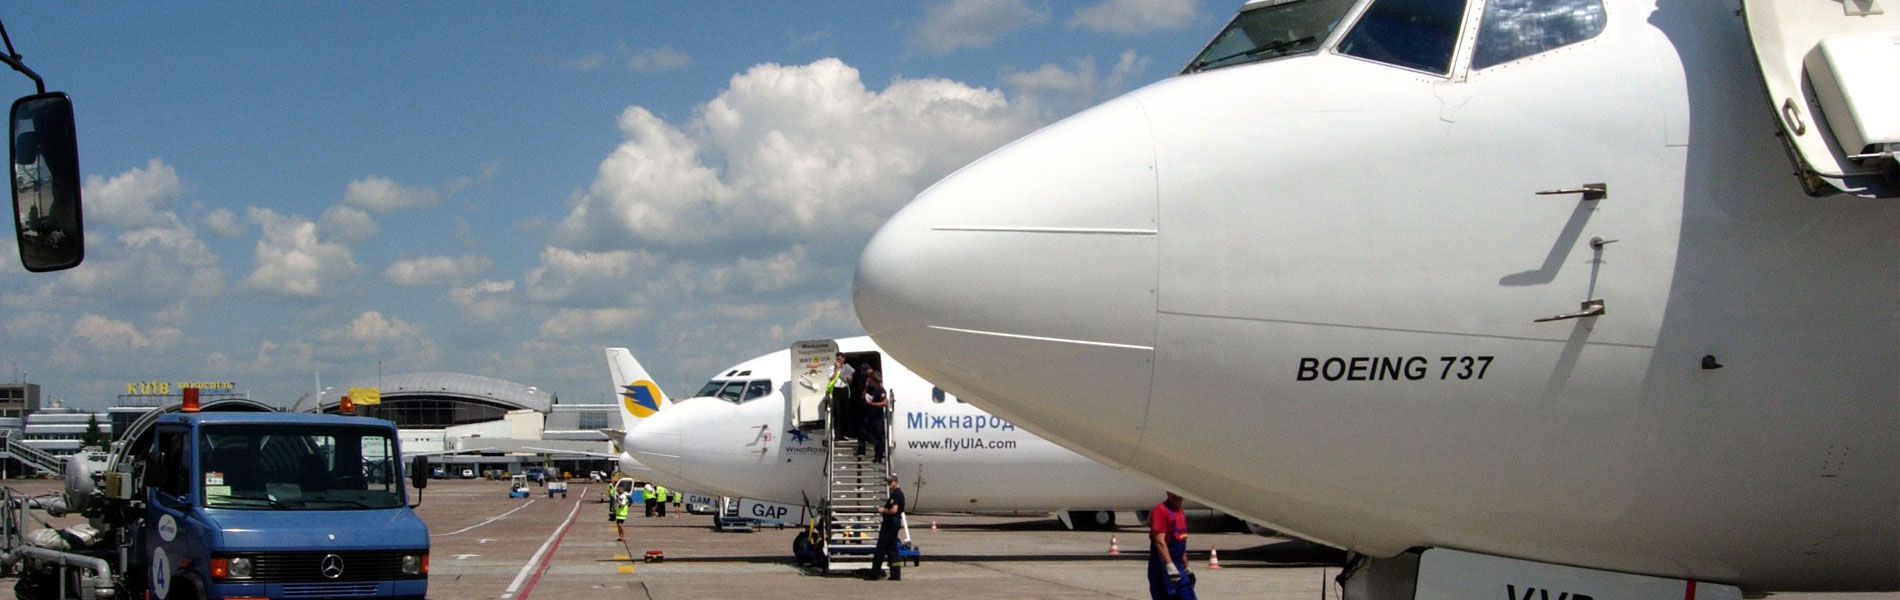 Air freight Services in Ireland